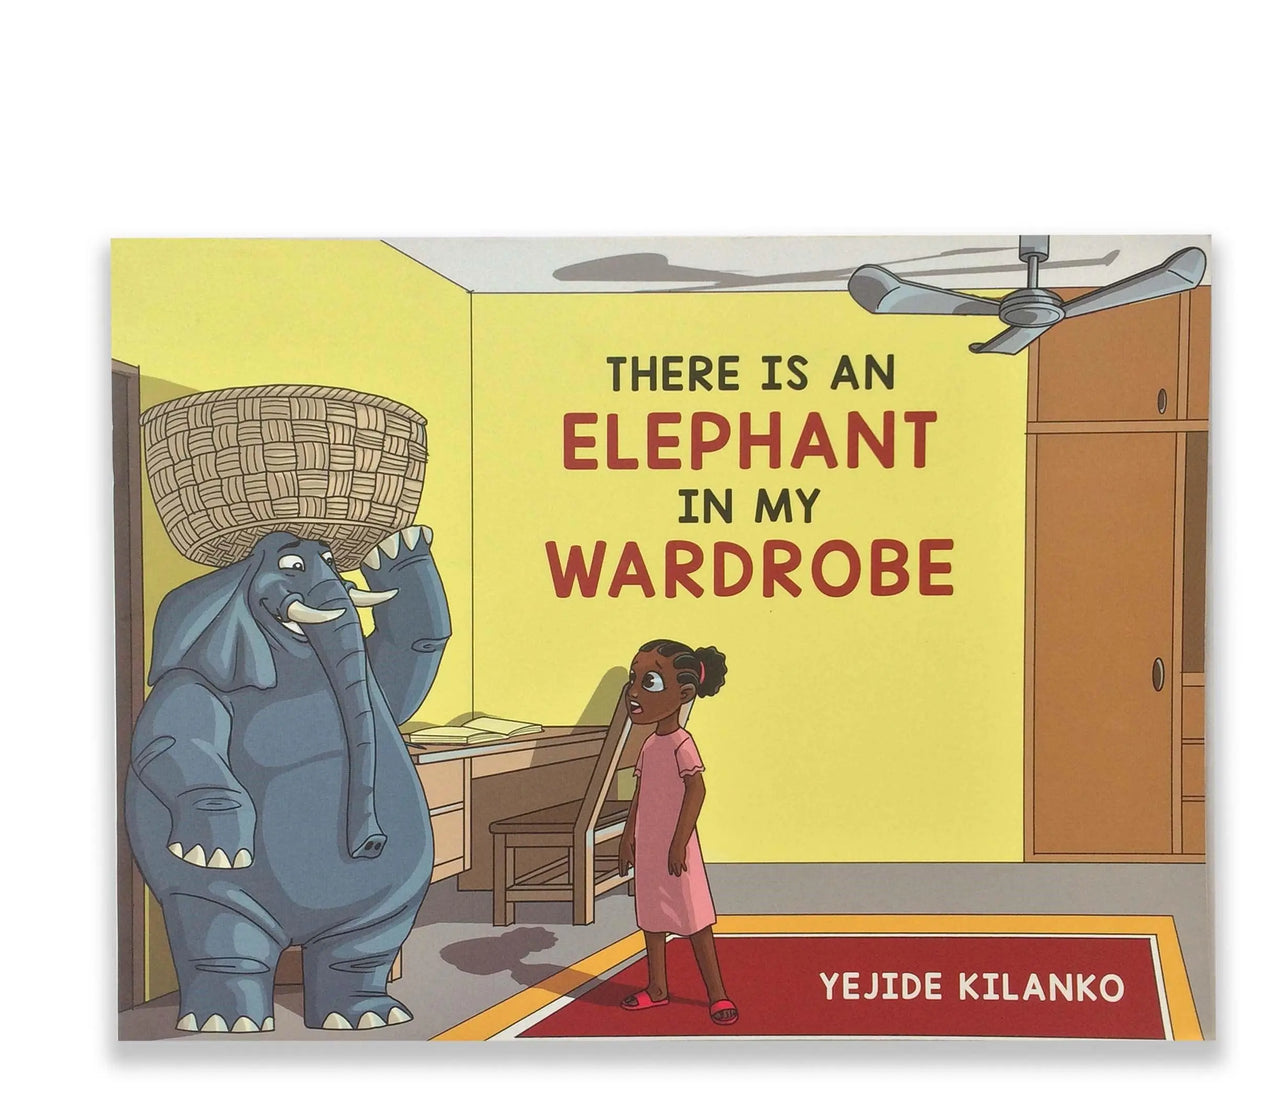 Bookpeddler-there-is-an-elephant-in-my-wardrobe 2